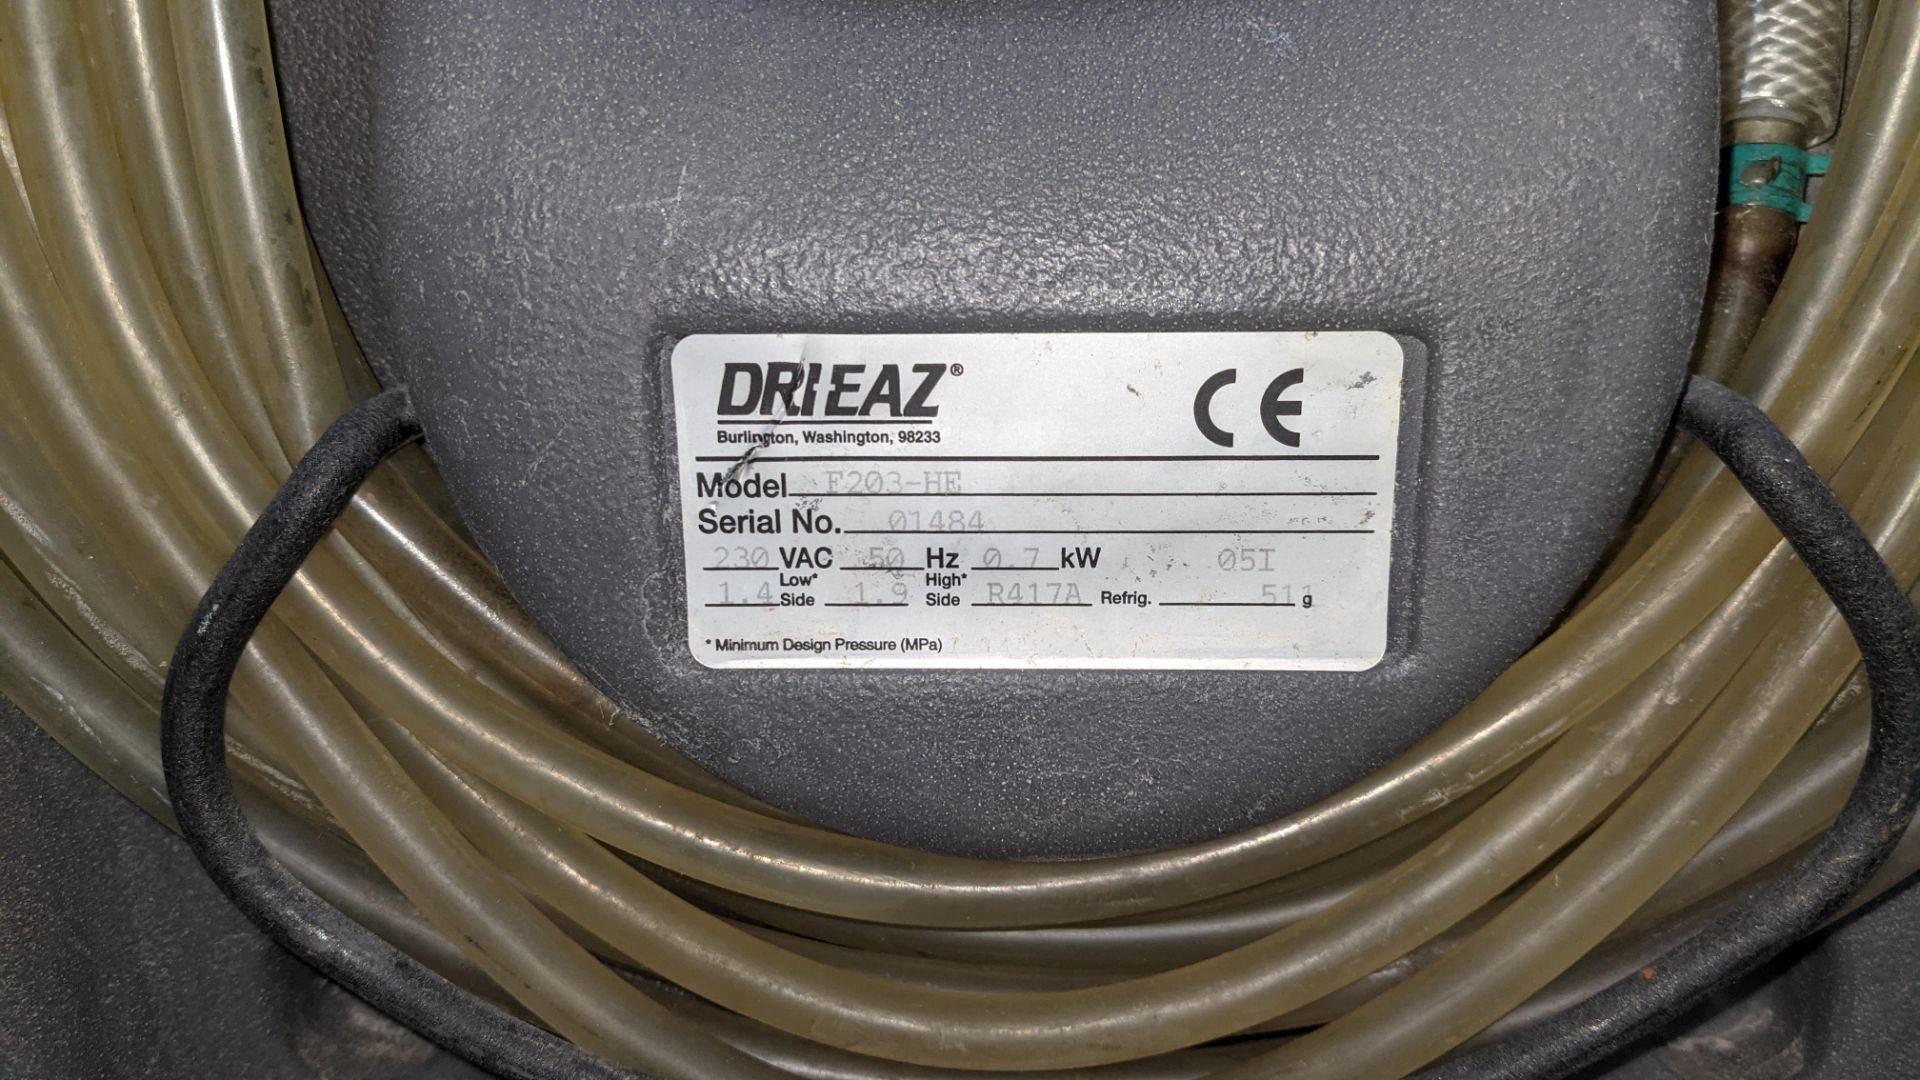 Drieaz Heylo dehumidifier model F203-HE including digital dehumidifier console. 932 recorded hours - Image 11 of 15